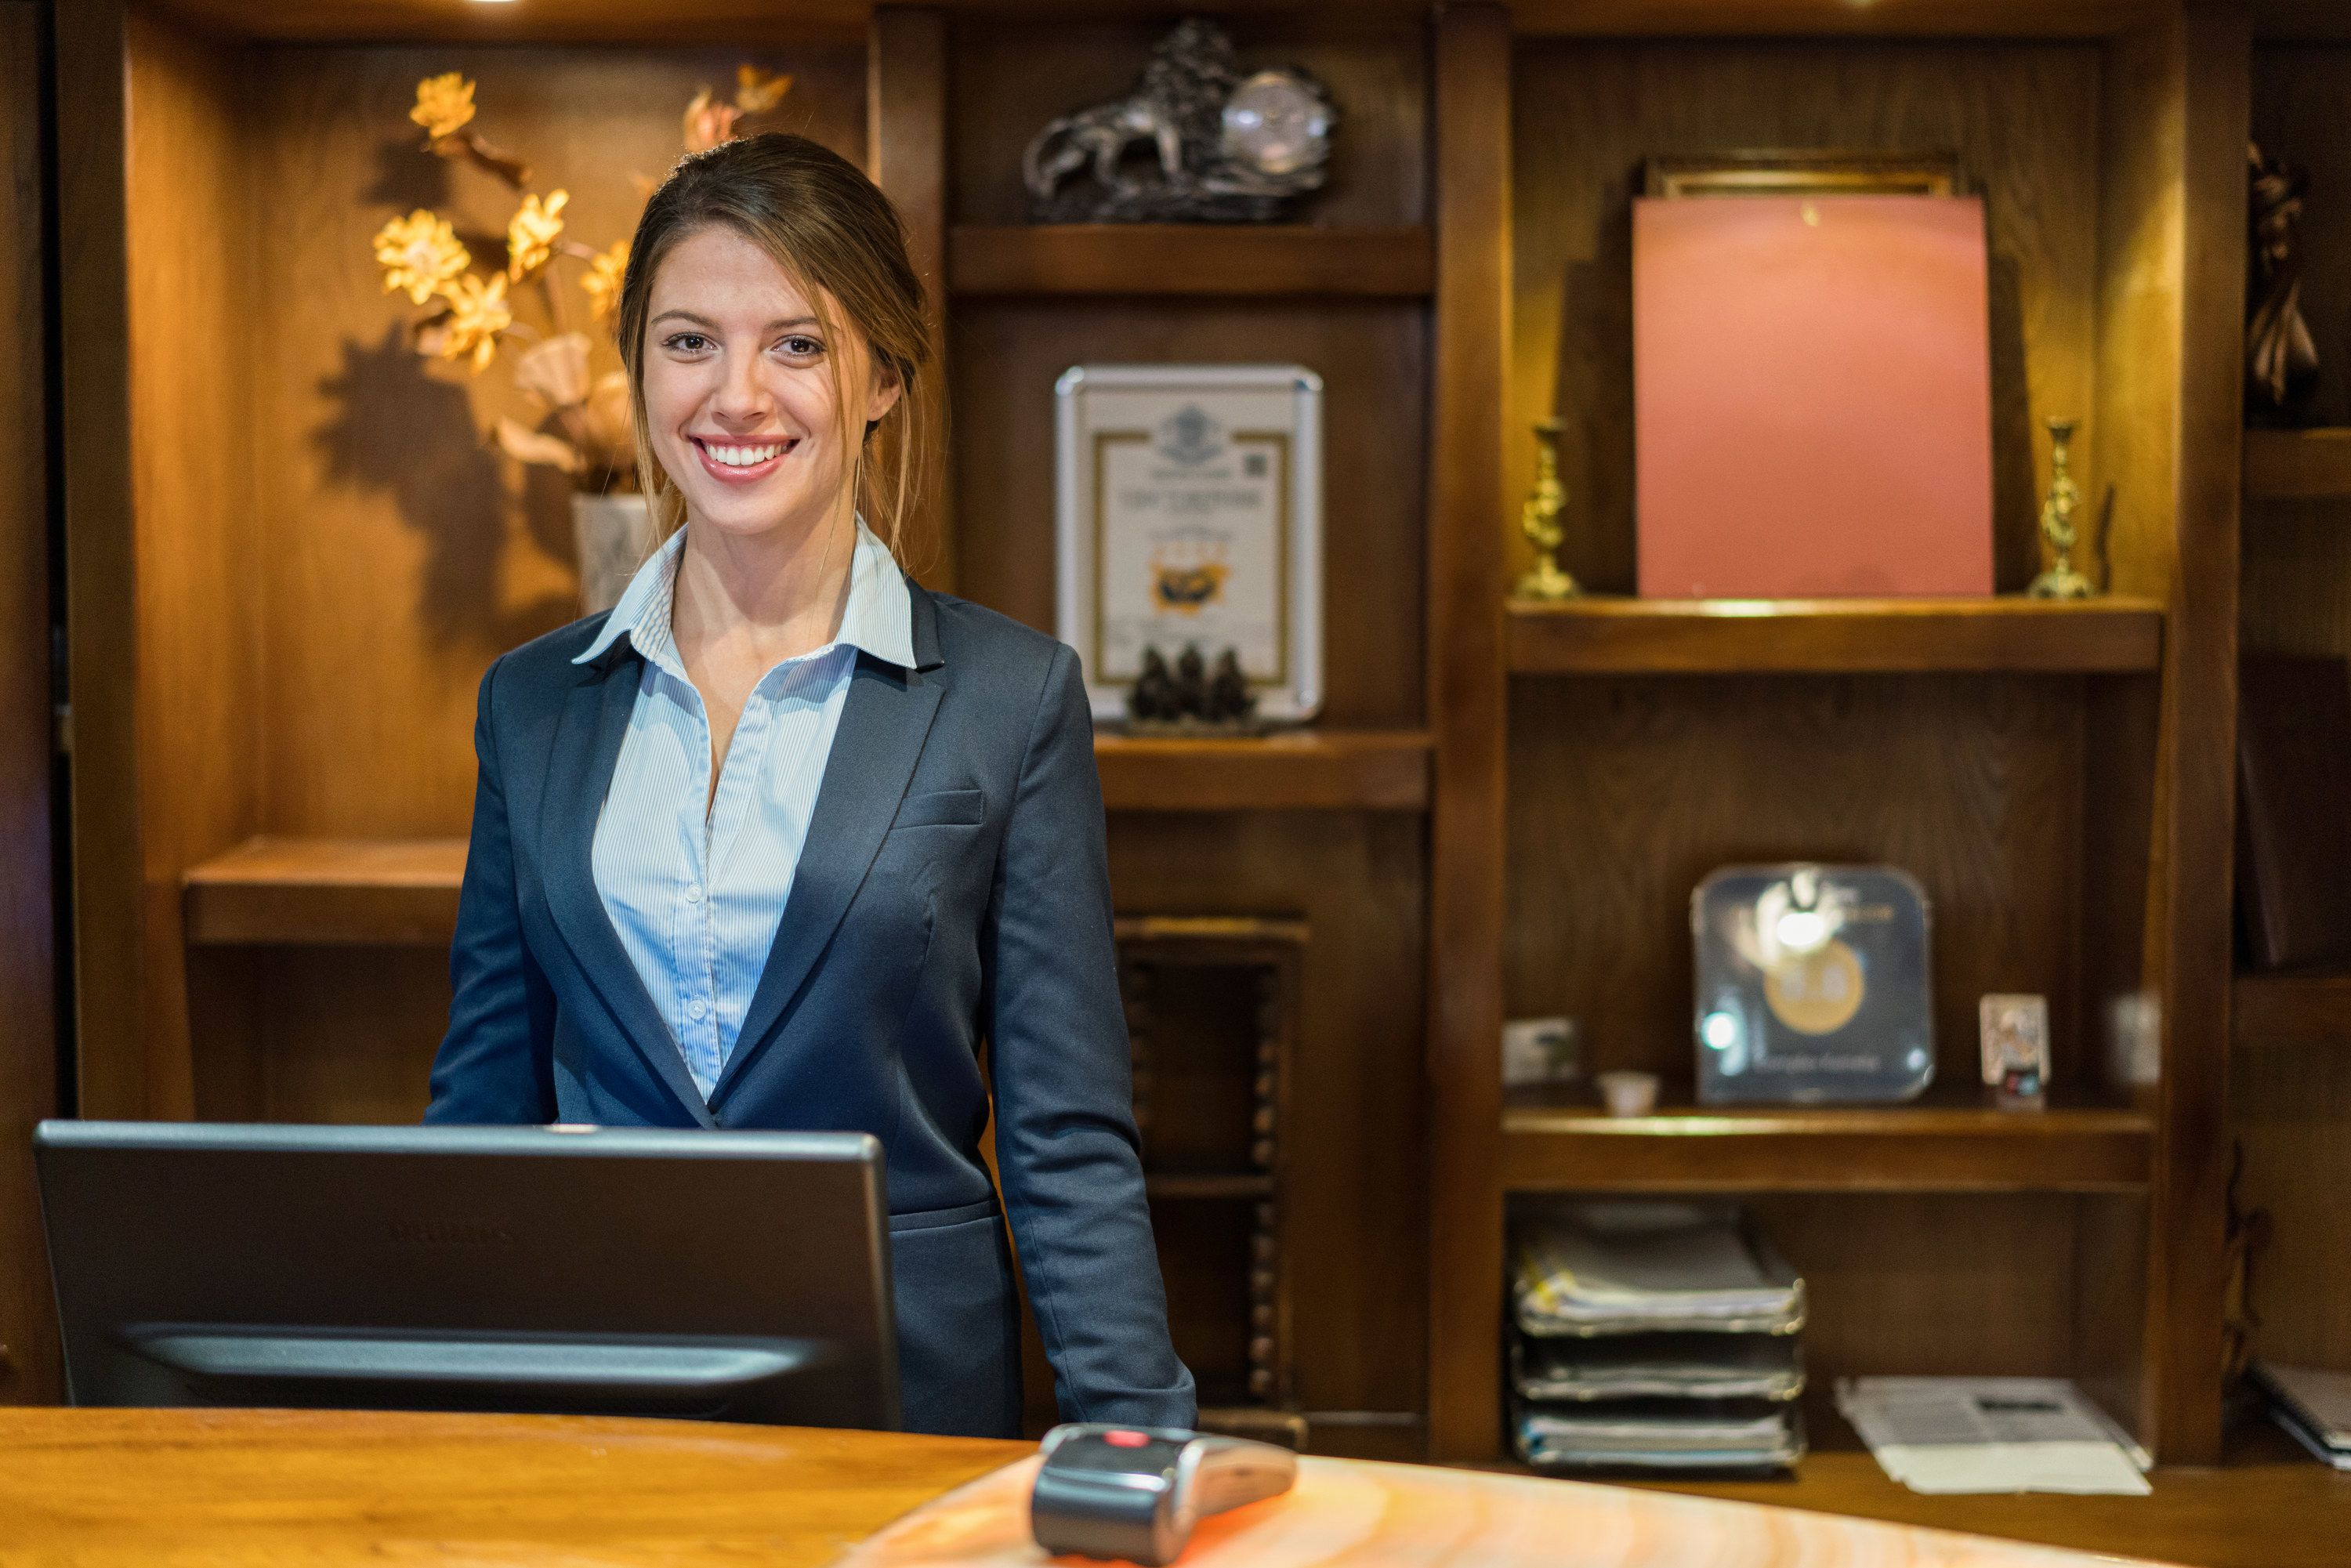 A woman standing at a hotel&#x27;s check-in desk smiling in a dark suit